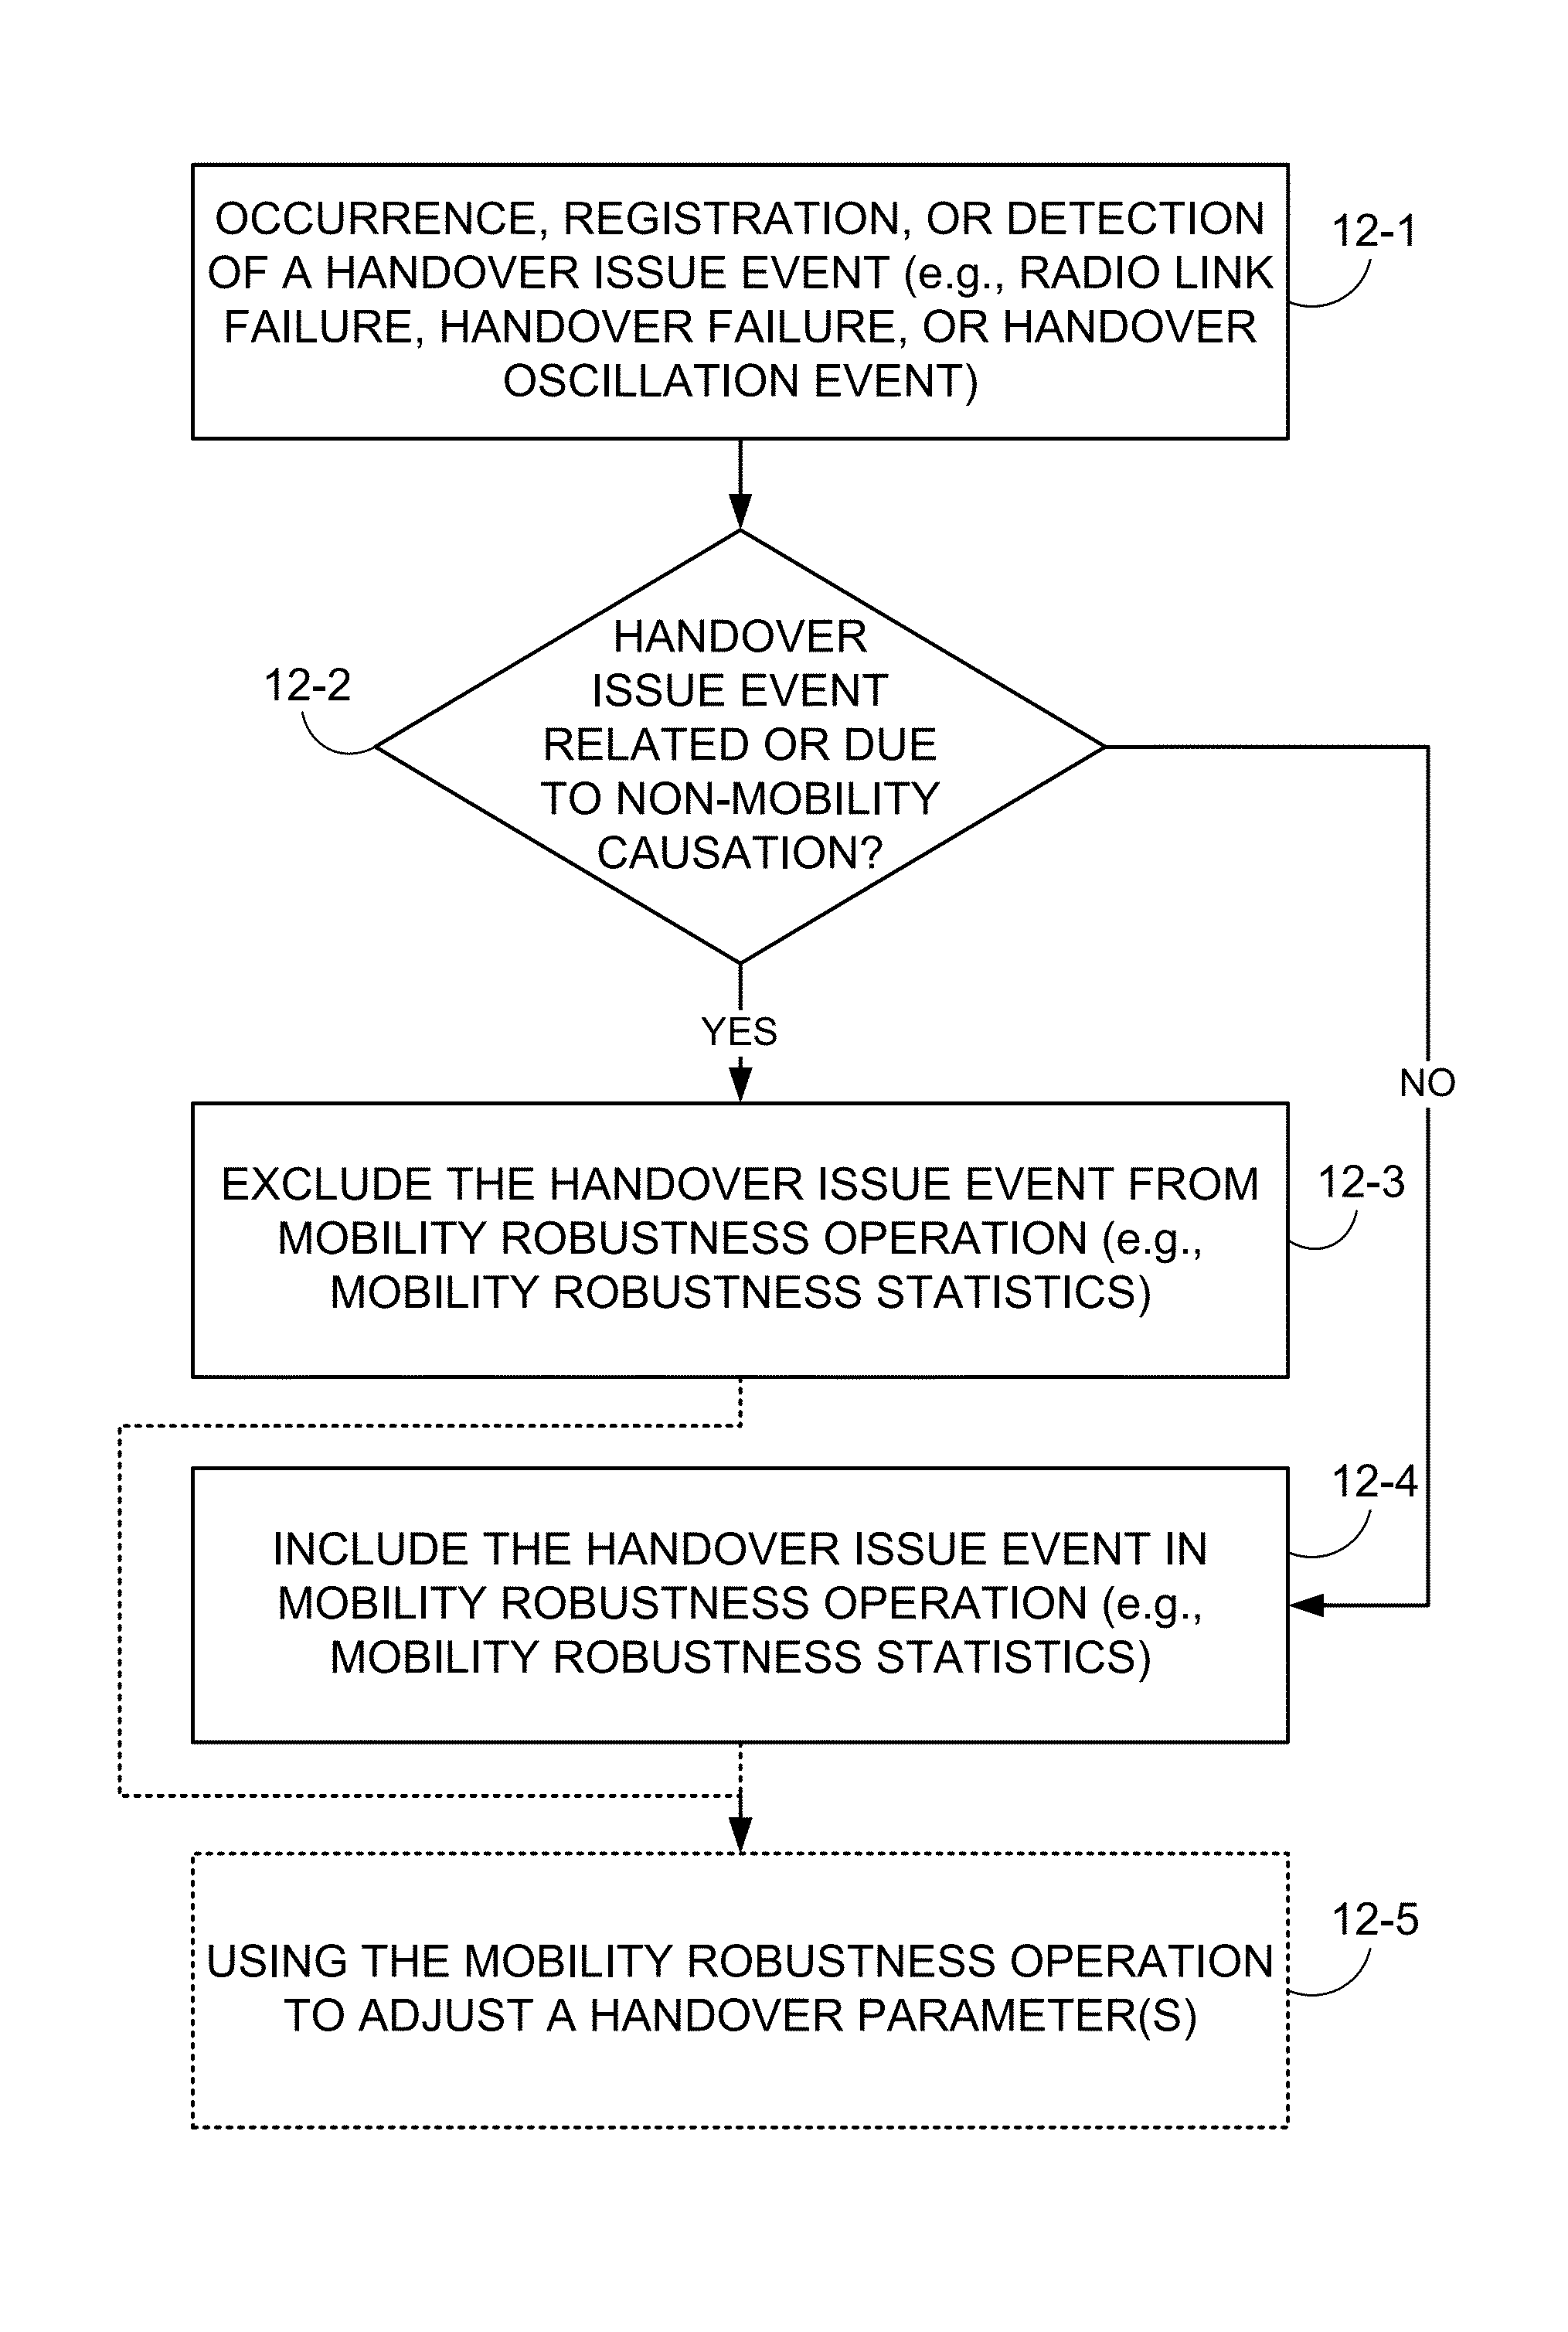 Method and apparatus for excluding non-mobility data from mobility key performance indicators